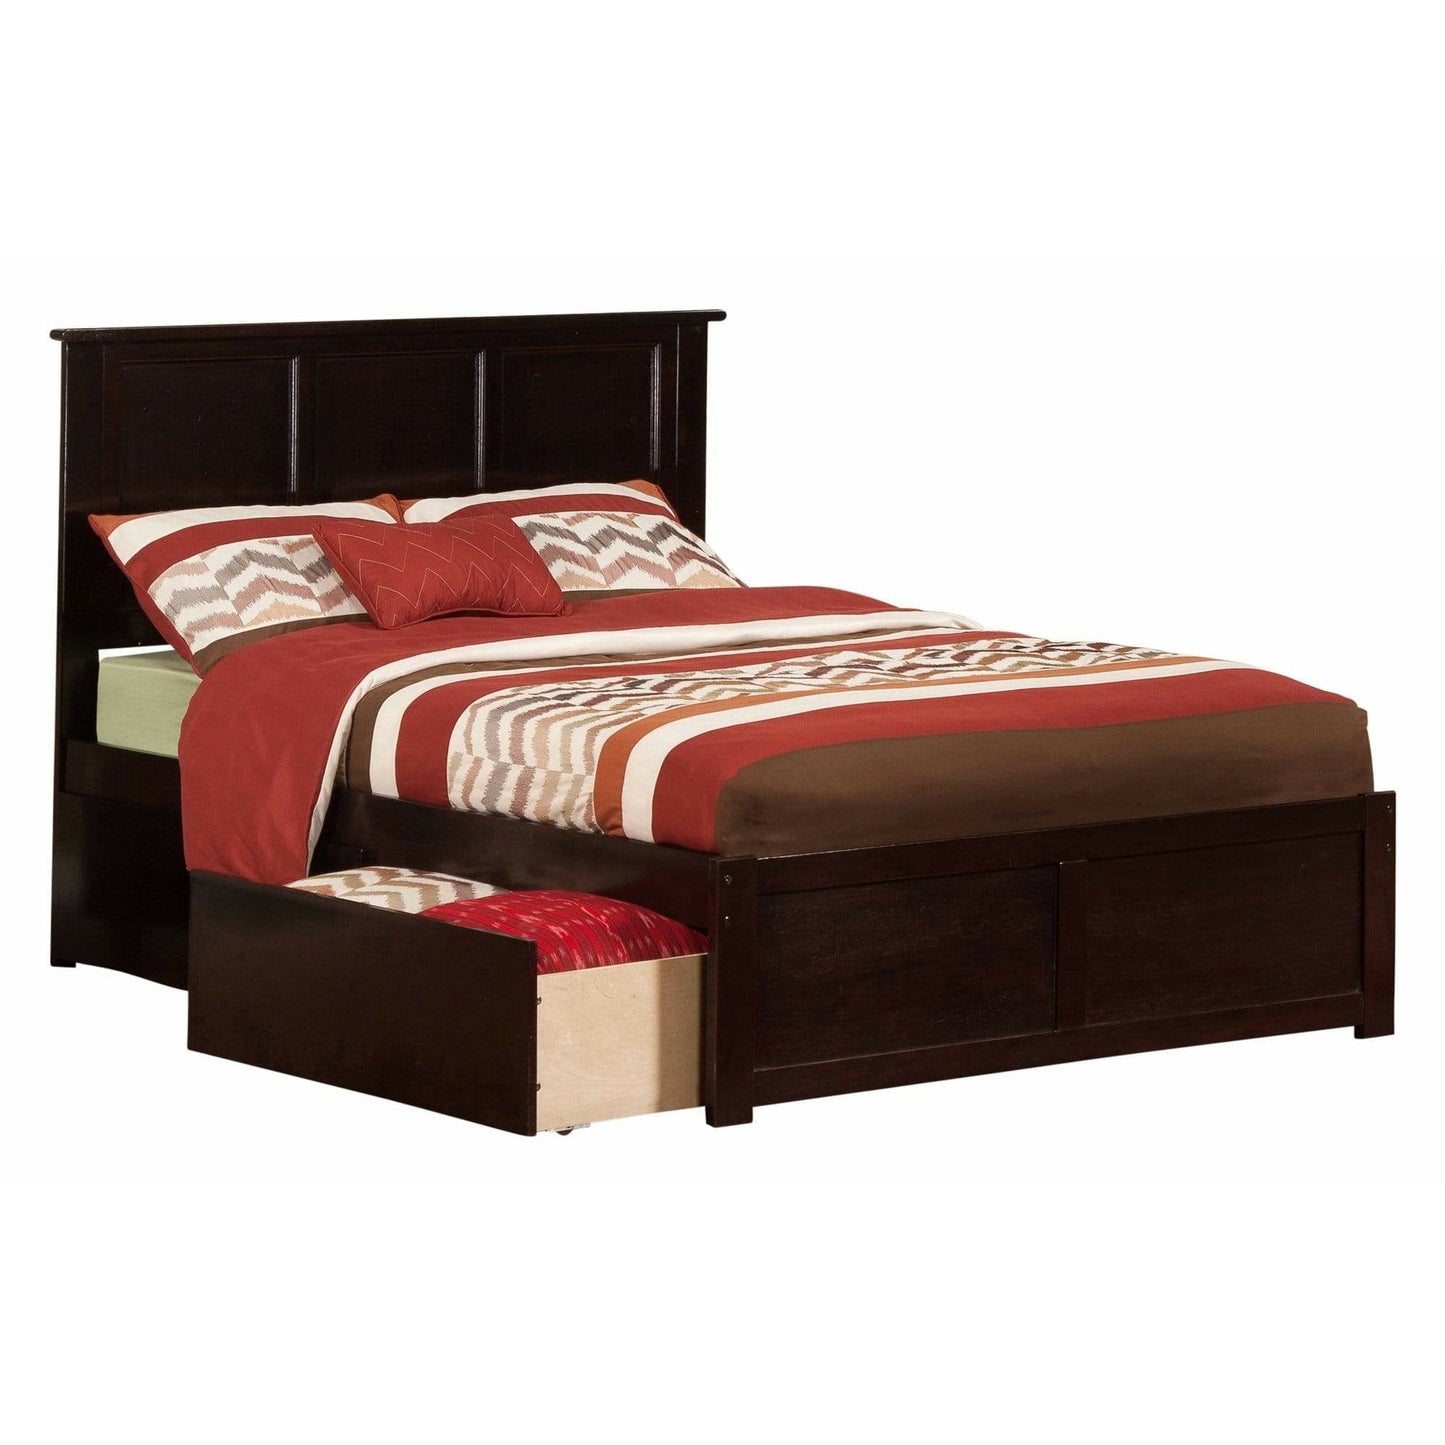 Atlantic Furniture Bed Espresso Madison Full Platform Bed with Flat Panel Foot Board and 2 Urban Bed Drawers in Espresso